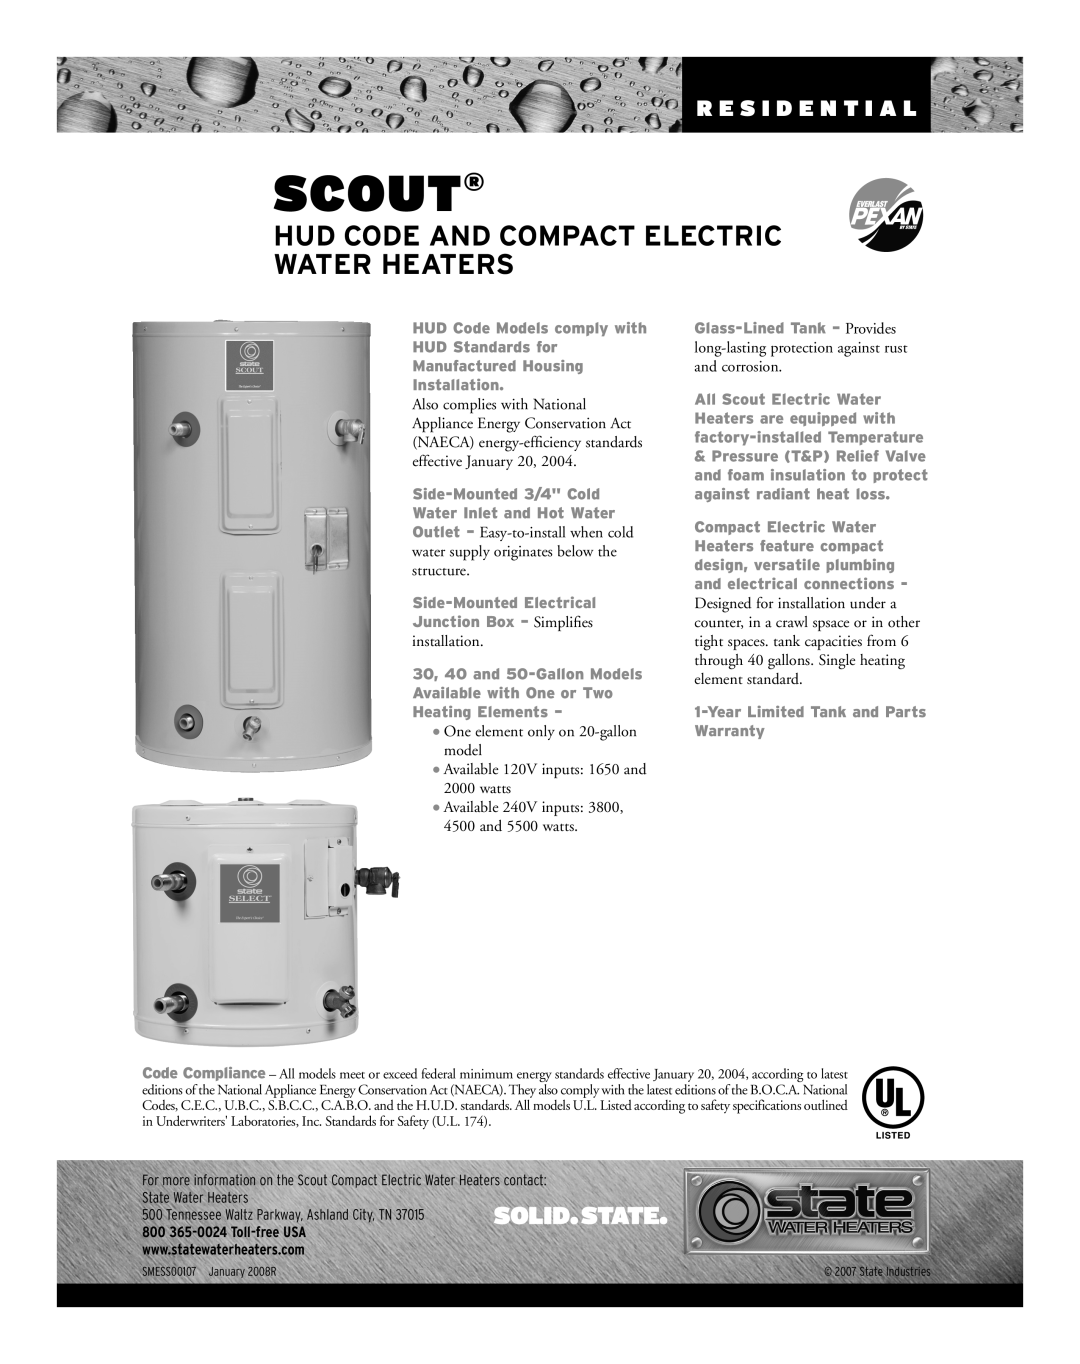 State Industries SMESS00107 warranty Scout, Hud Code And Compact Electric Water Heaters, R E S I D E N T I A L 